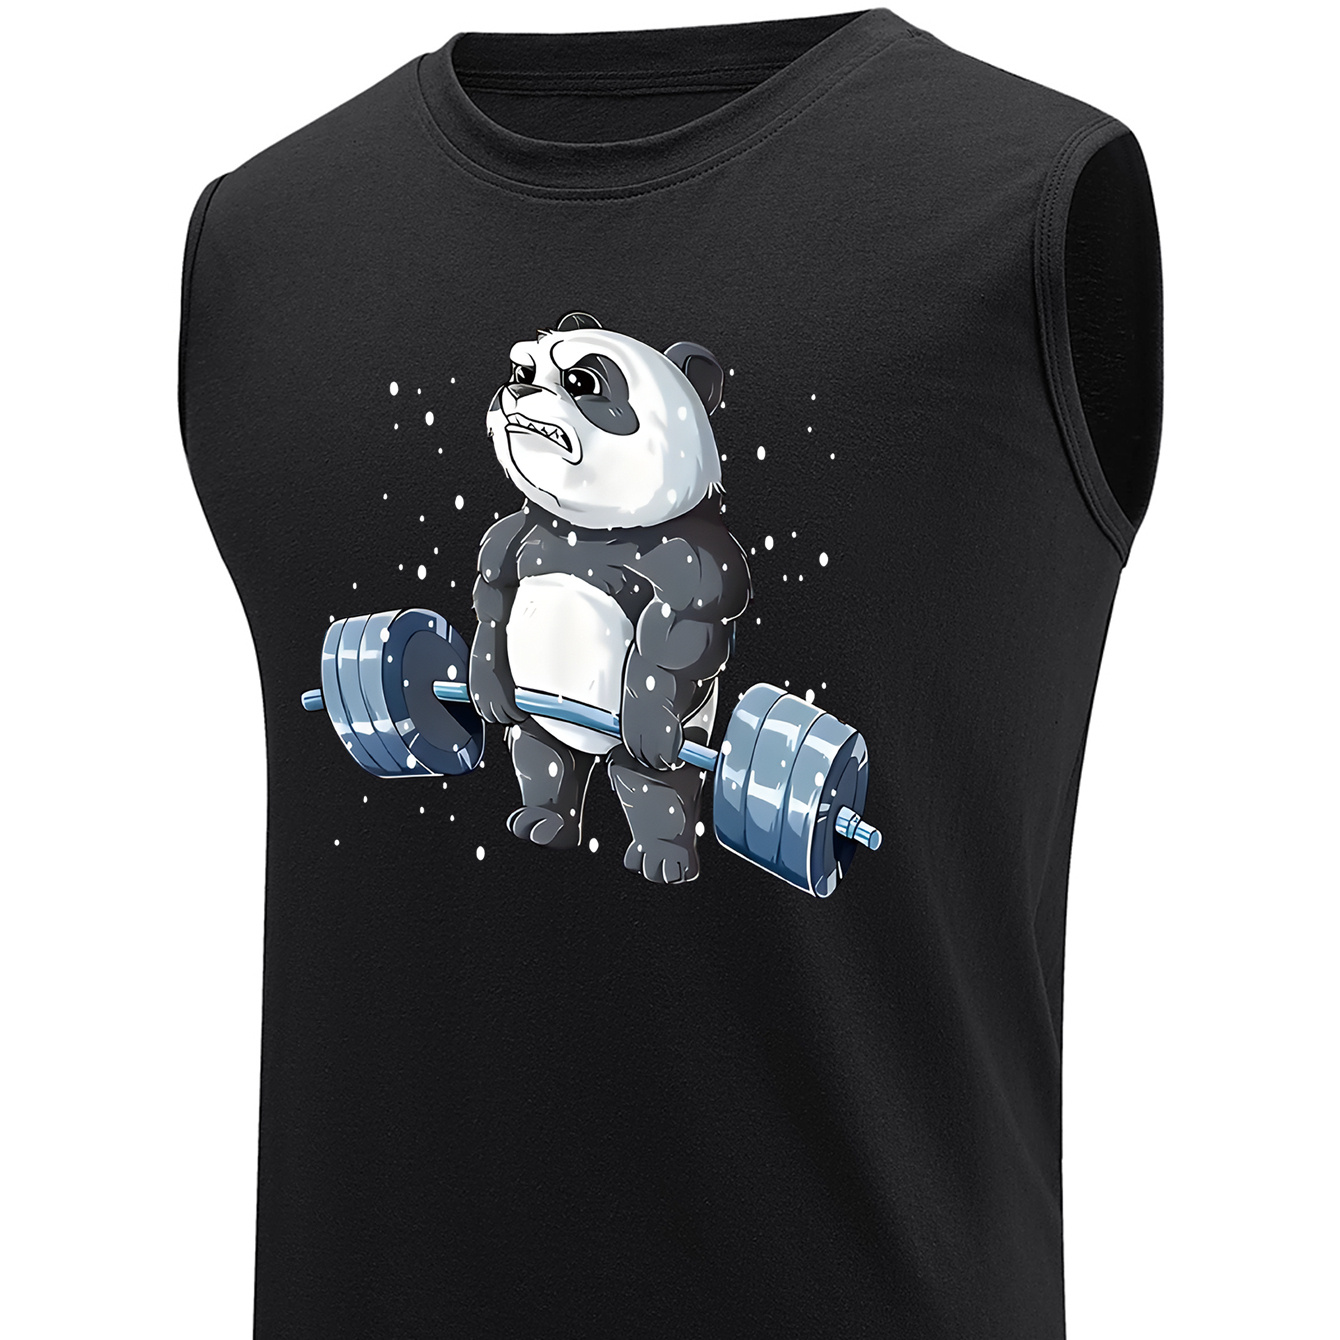 

Plus Size Men's Anime Panda Graphic Print Tank Top For Sports/fitness, Breathable Sleeveless Tees